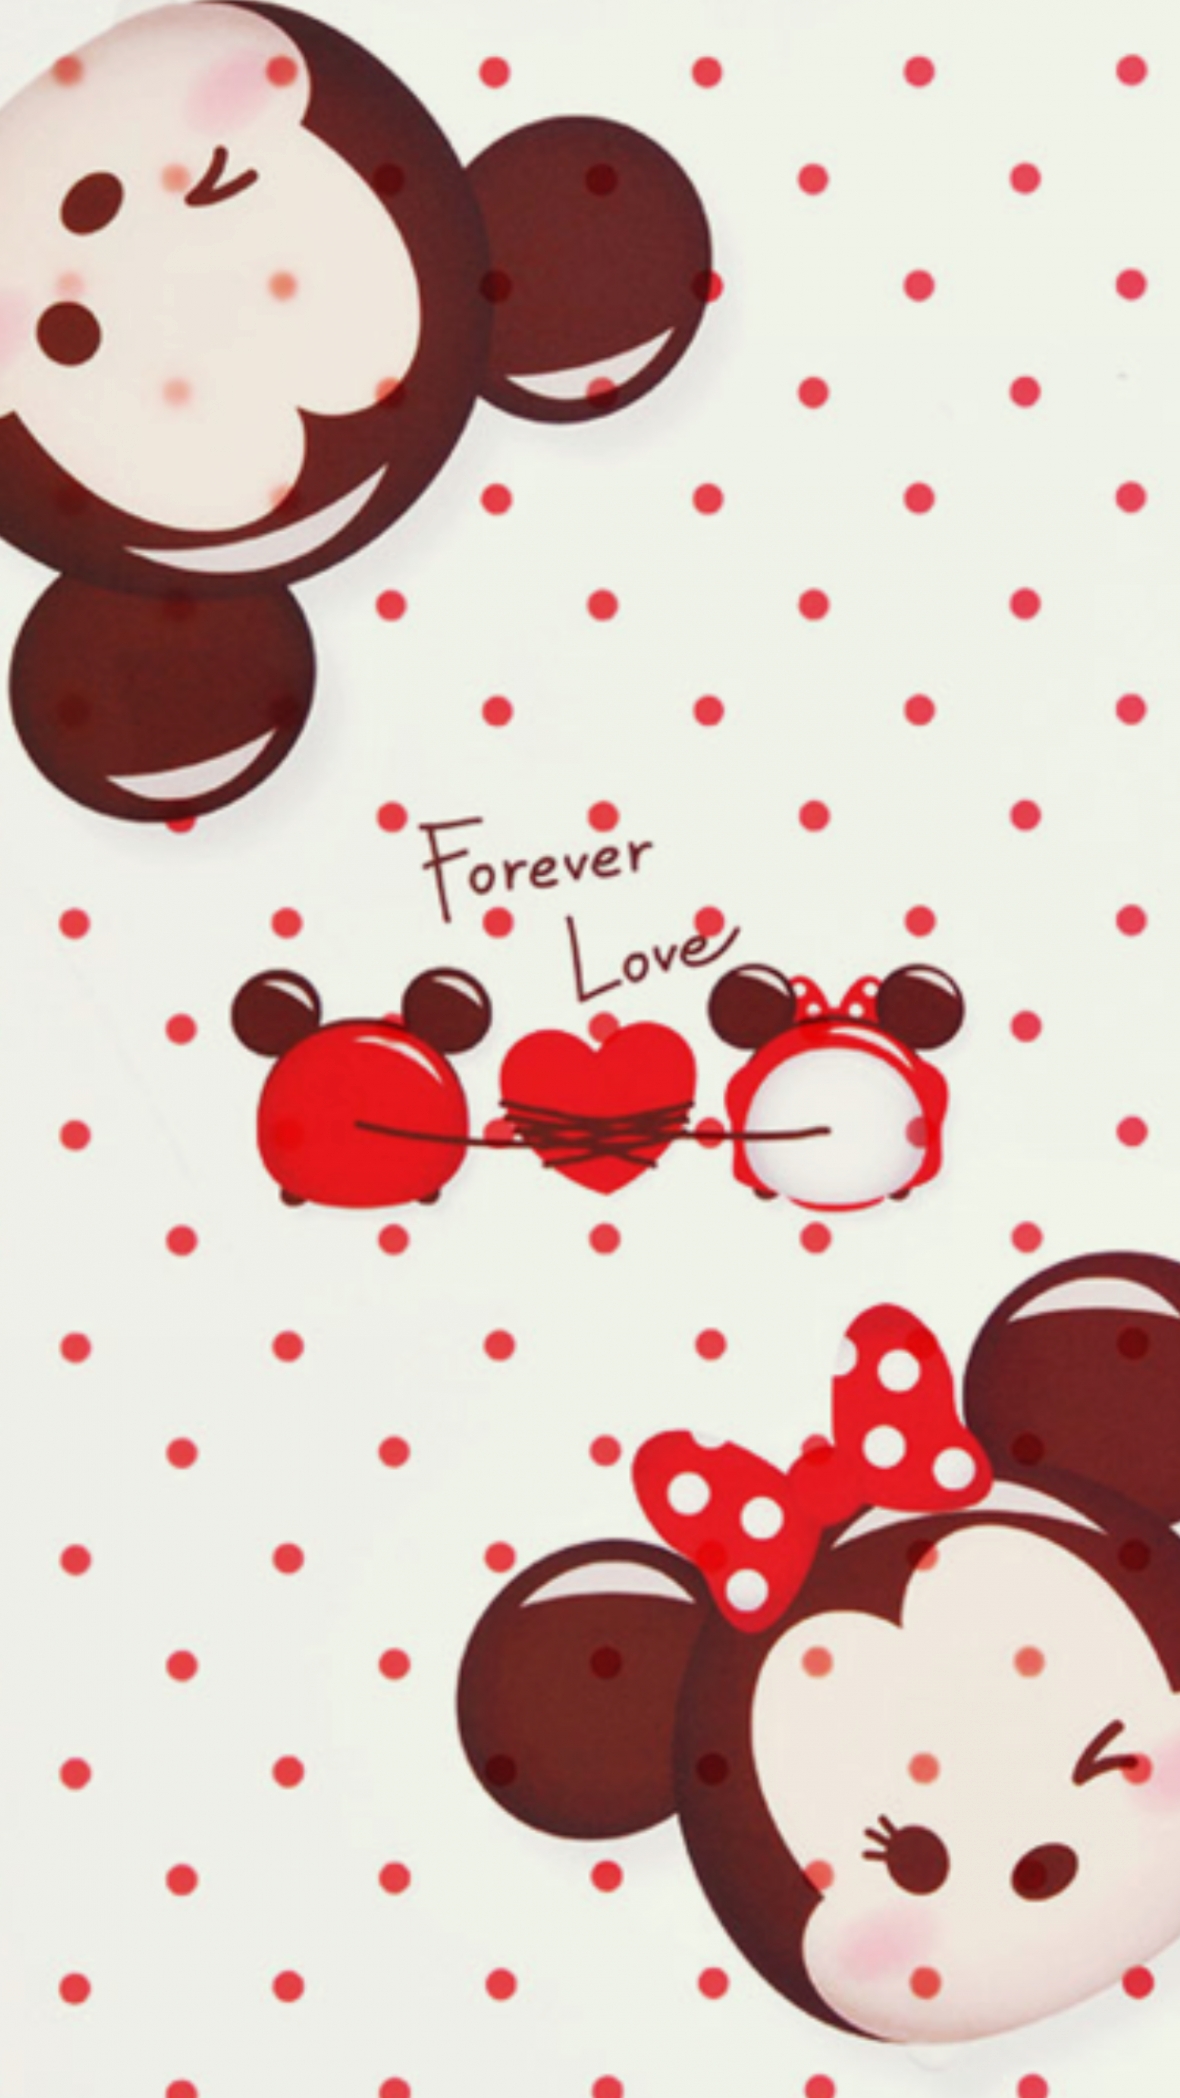 Mickey Mouse Wallpaper - Cute Minnie Mouse And Mickey Mouse - HD Wallpaper 